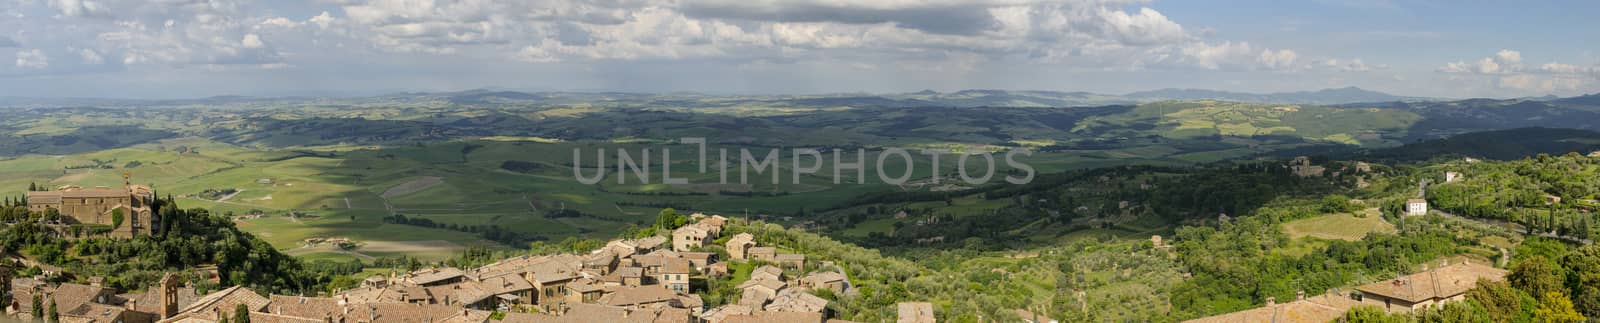 Rooftops of Montalcino and scenic view of typical Tuscany landscape in Val D'Orcia: hills, meadows and green fields. Tuscany, Italy, Europe